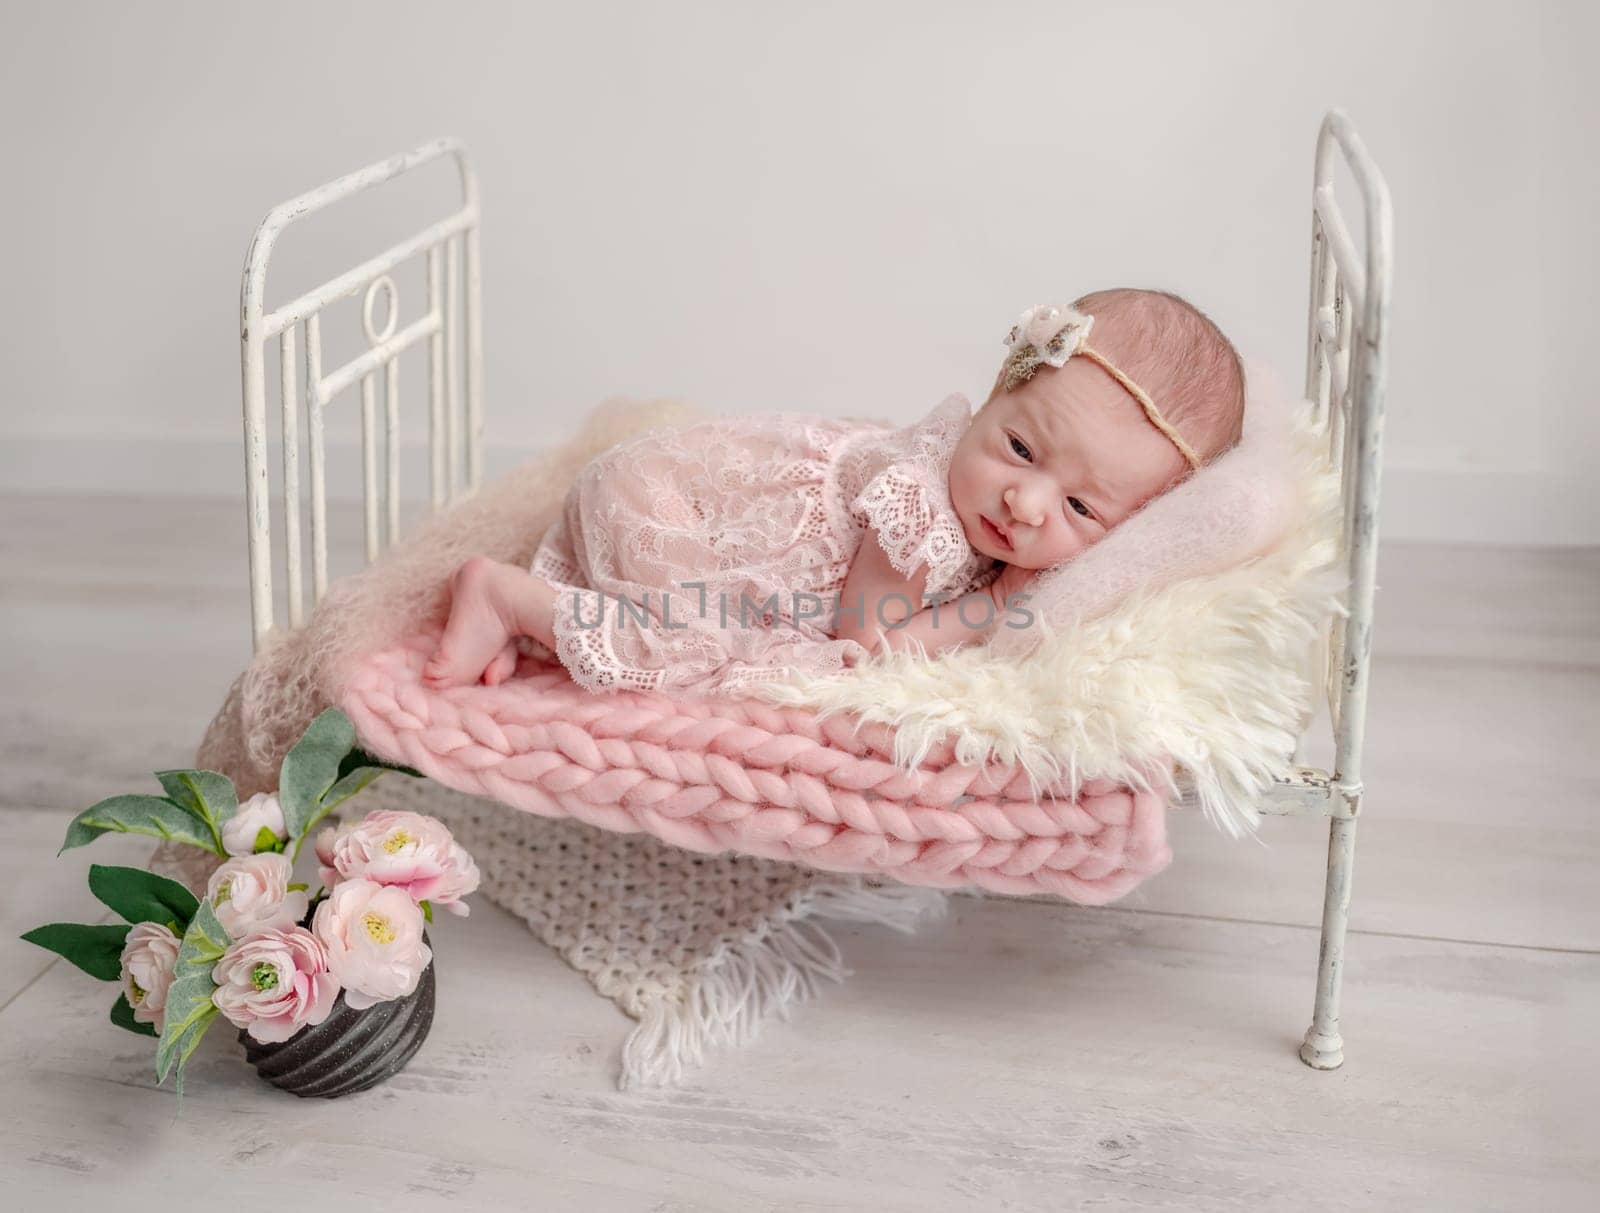 Newborn Girl In Lace Dress Sleeps In Tiny Crib, Captured In Professional Photo With Pink Tones